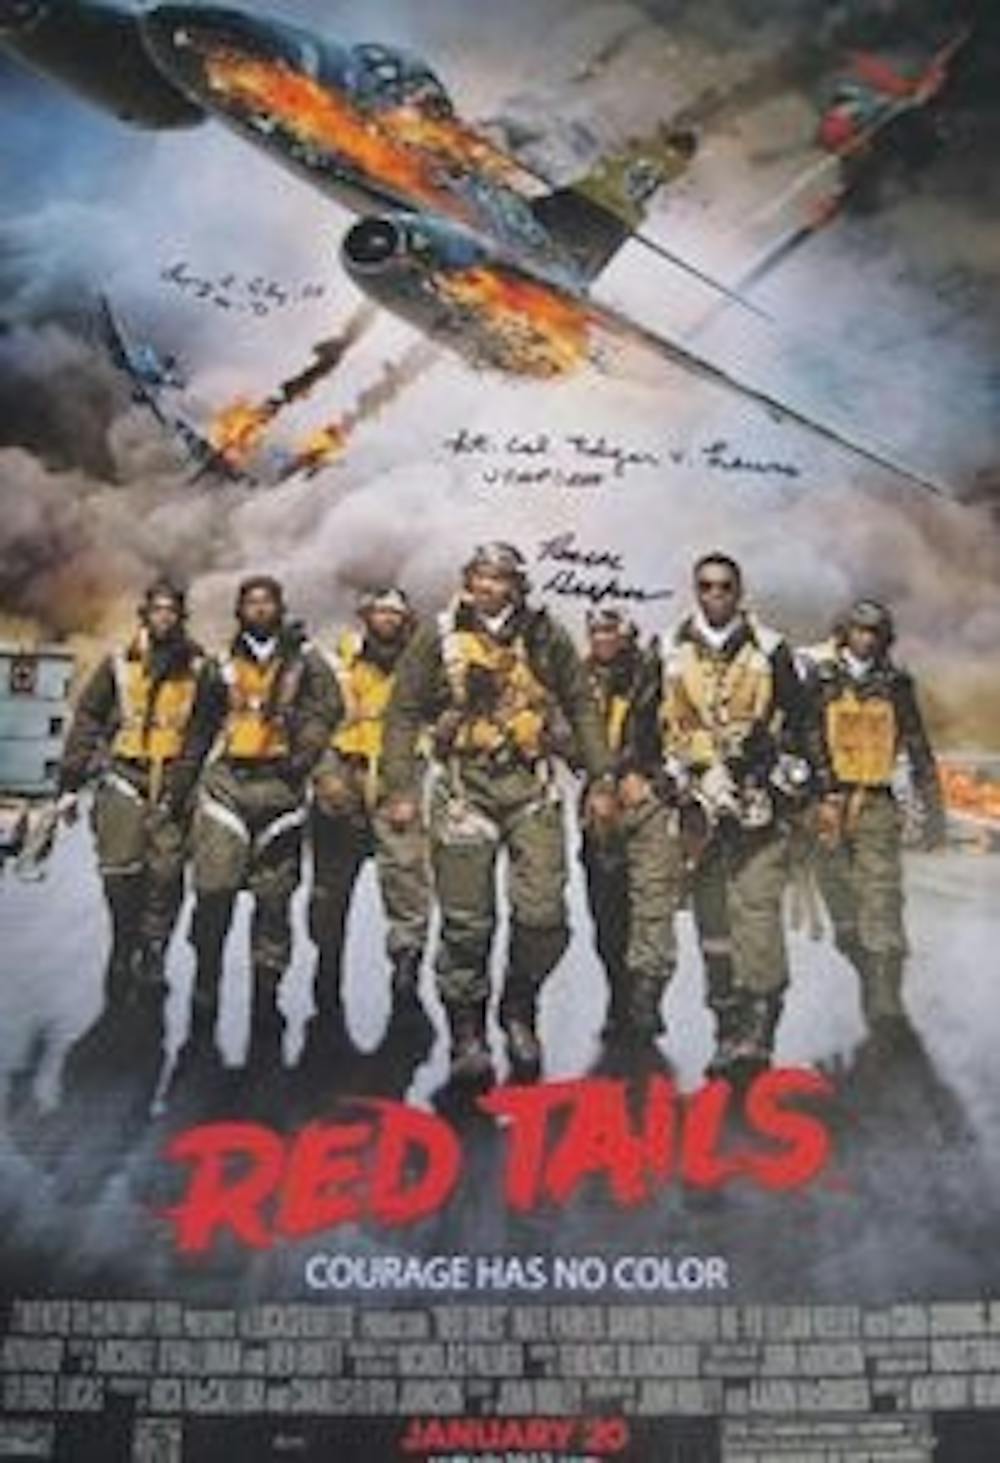 The next "Life Interrupted" film series event, Oct. 25 at 5:30 p.m. and will show "Red Tails," a movie about a group of Tuskegee pilots serving in World War II. (Courtesy of Lucasfilm)